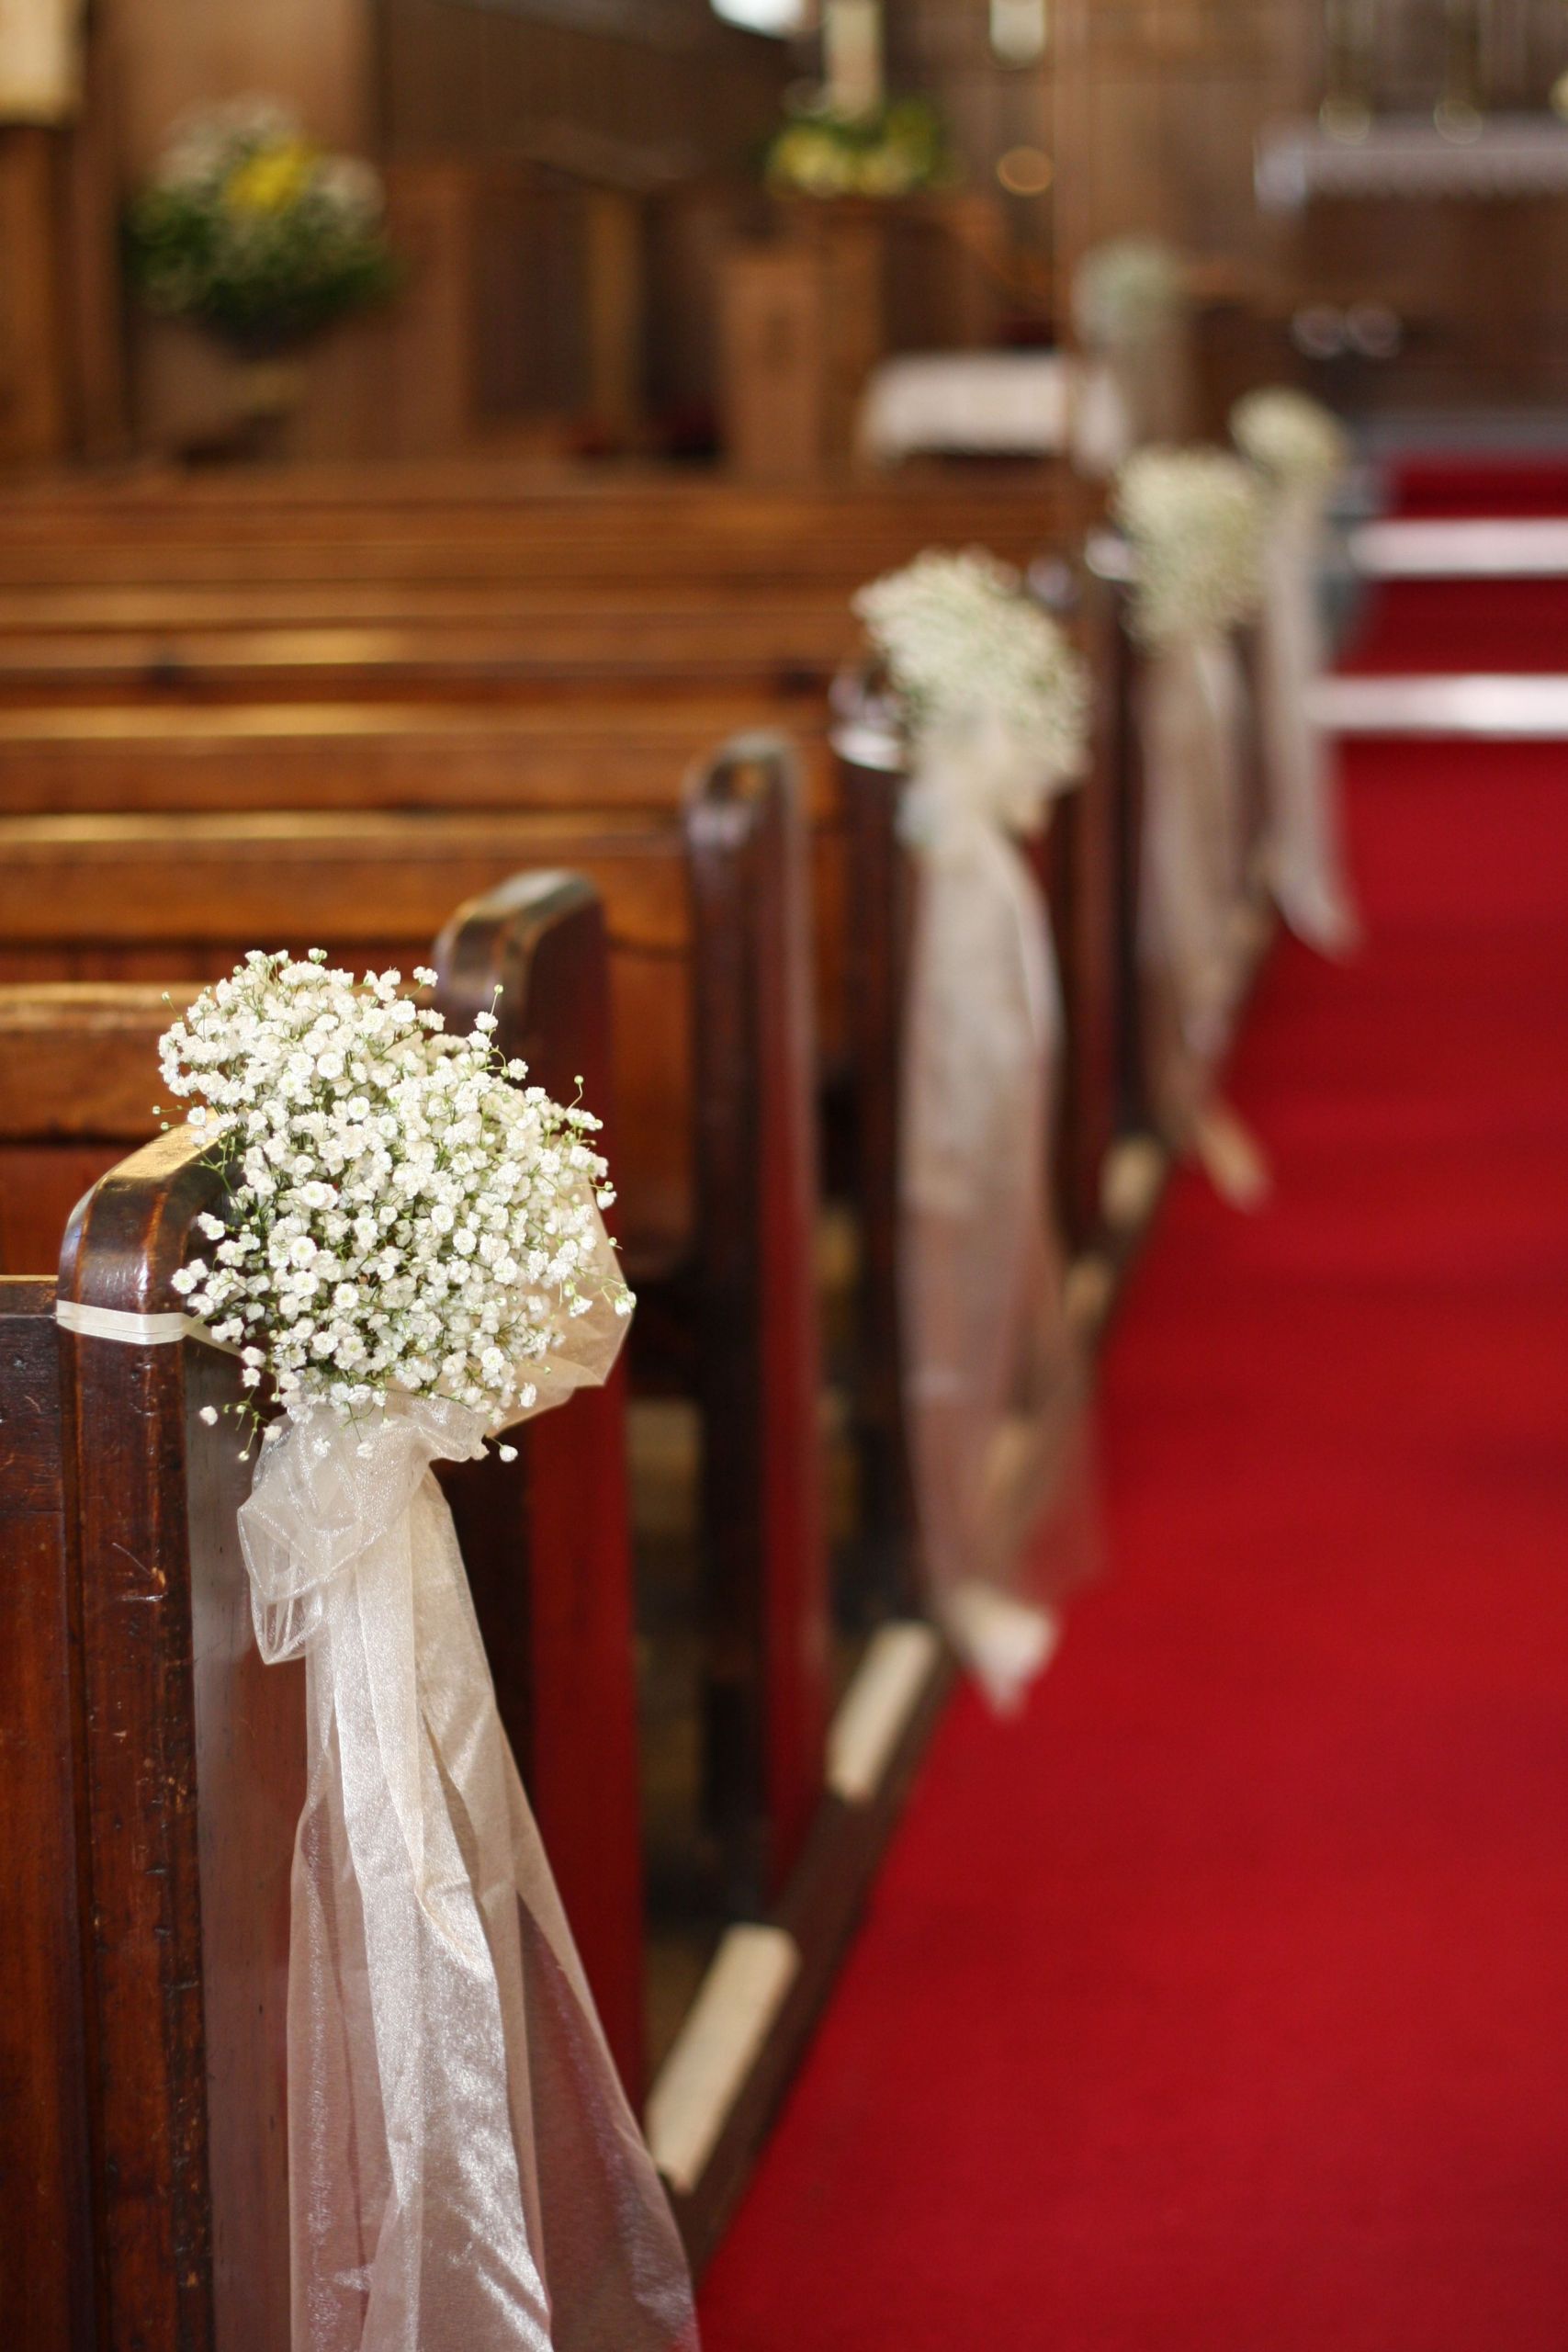 Pew Decorations For Church Wedding
 Baby s breath pew ends